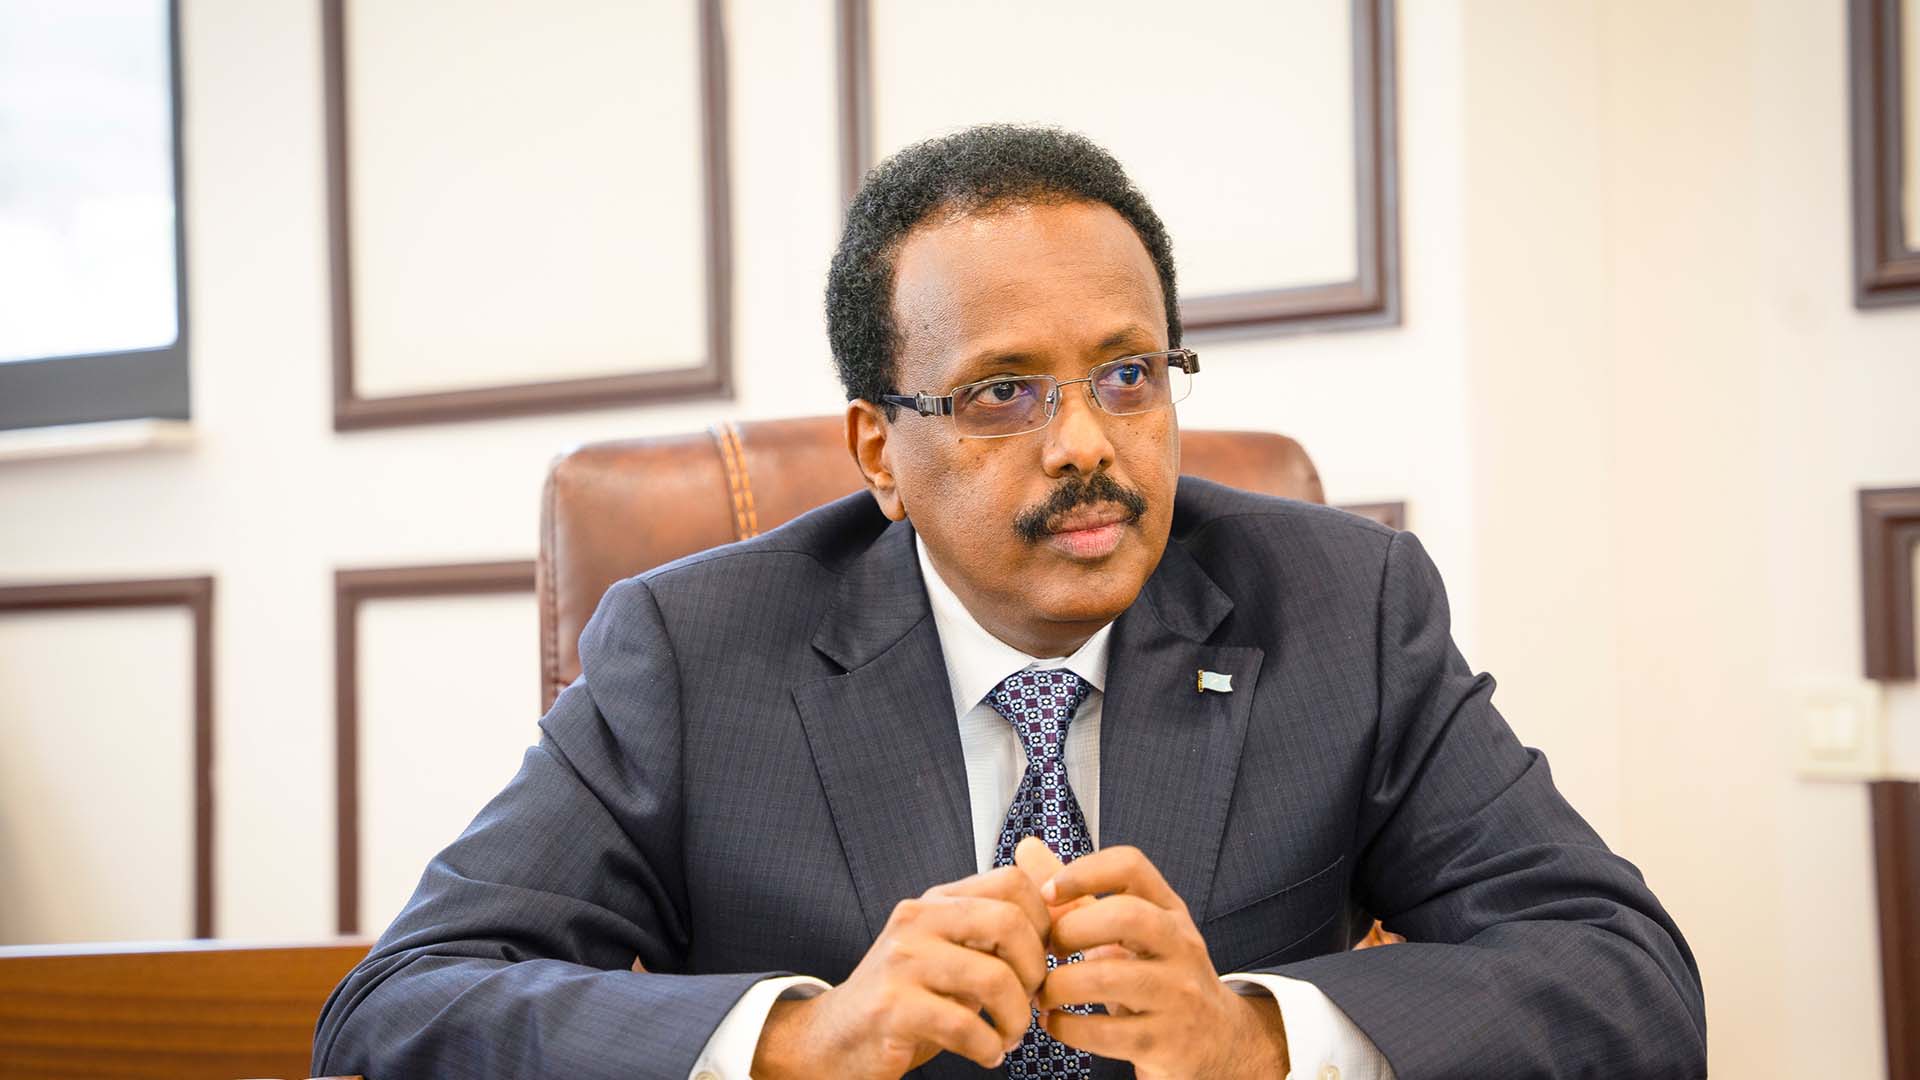 Somalia's ex-president warns of risk of 'political crisis' over plans to overhaul constitution